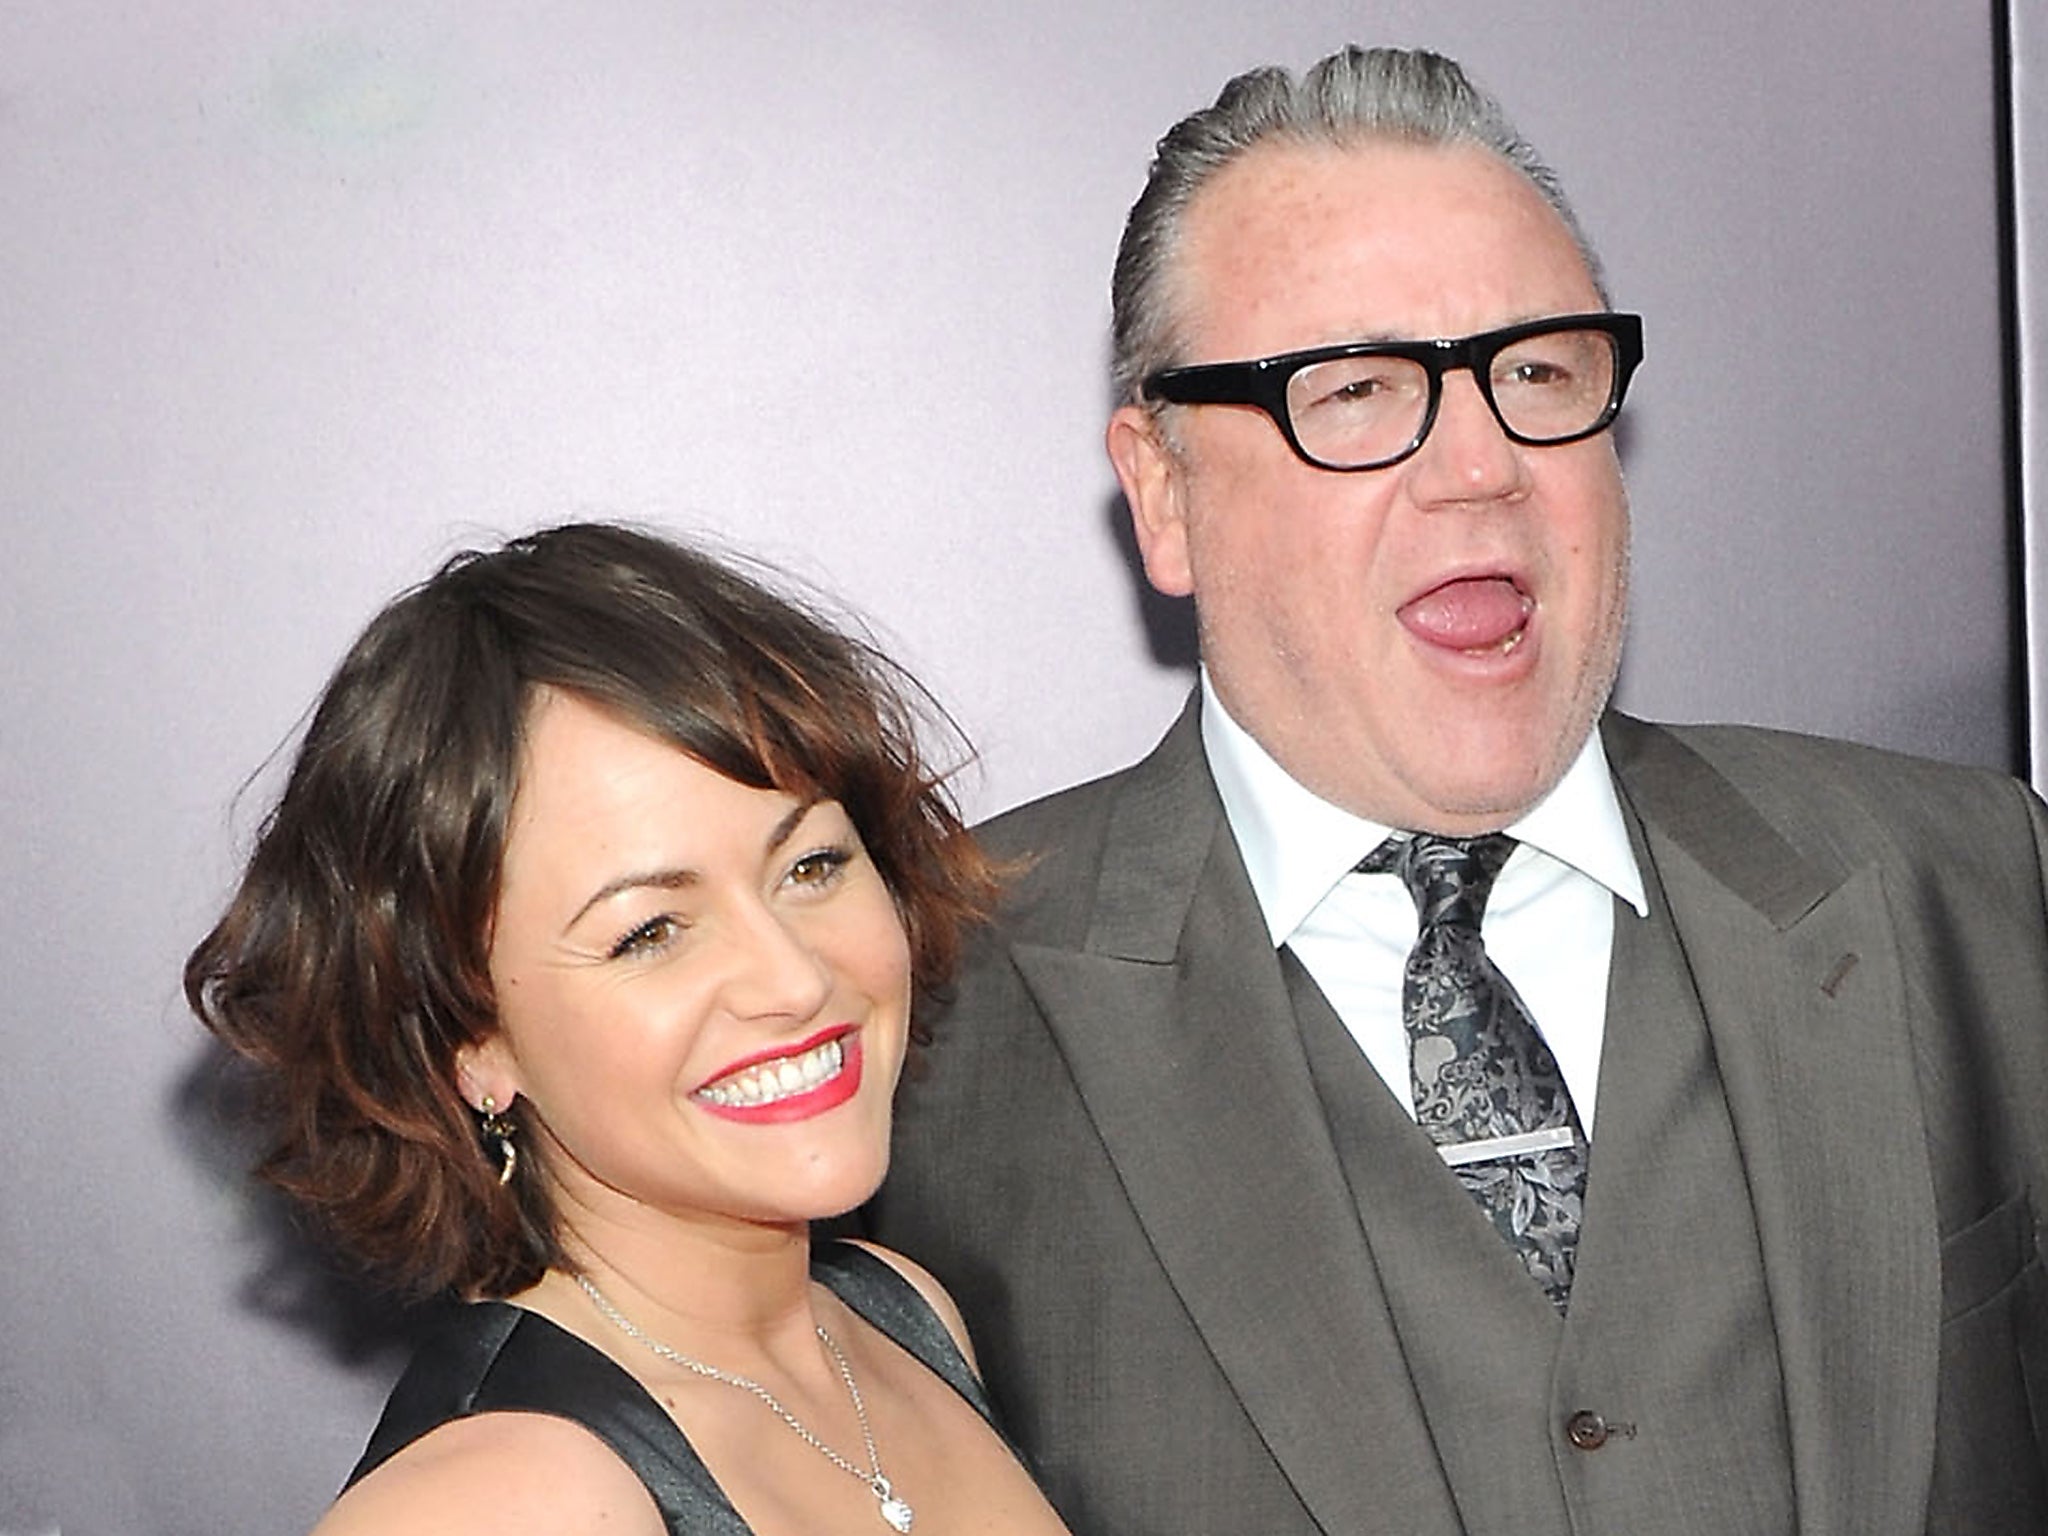 The actress and her famous father, Ray Winstone